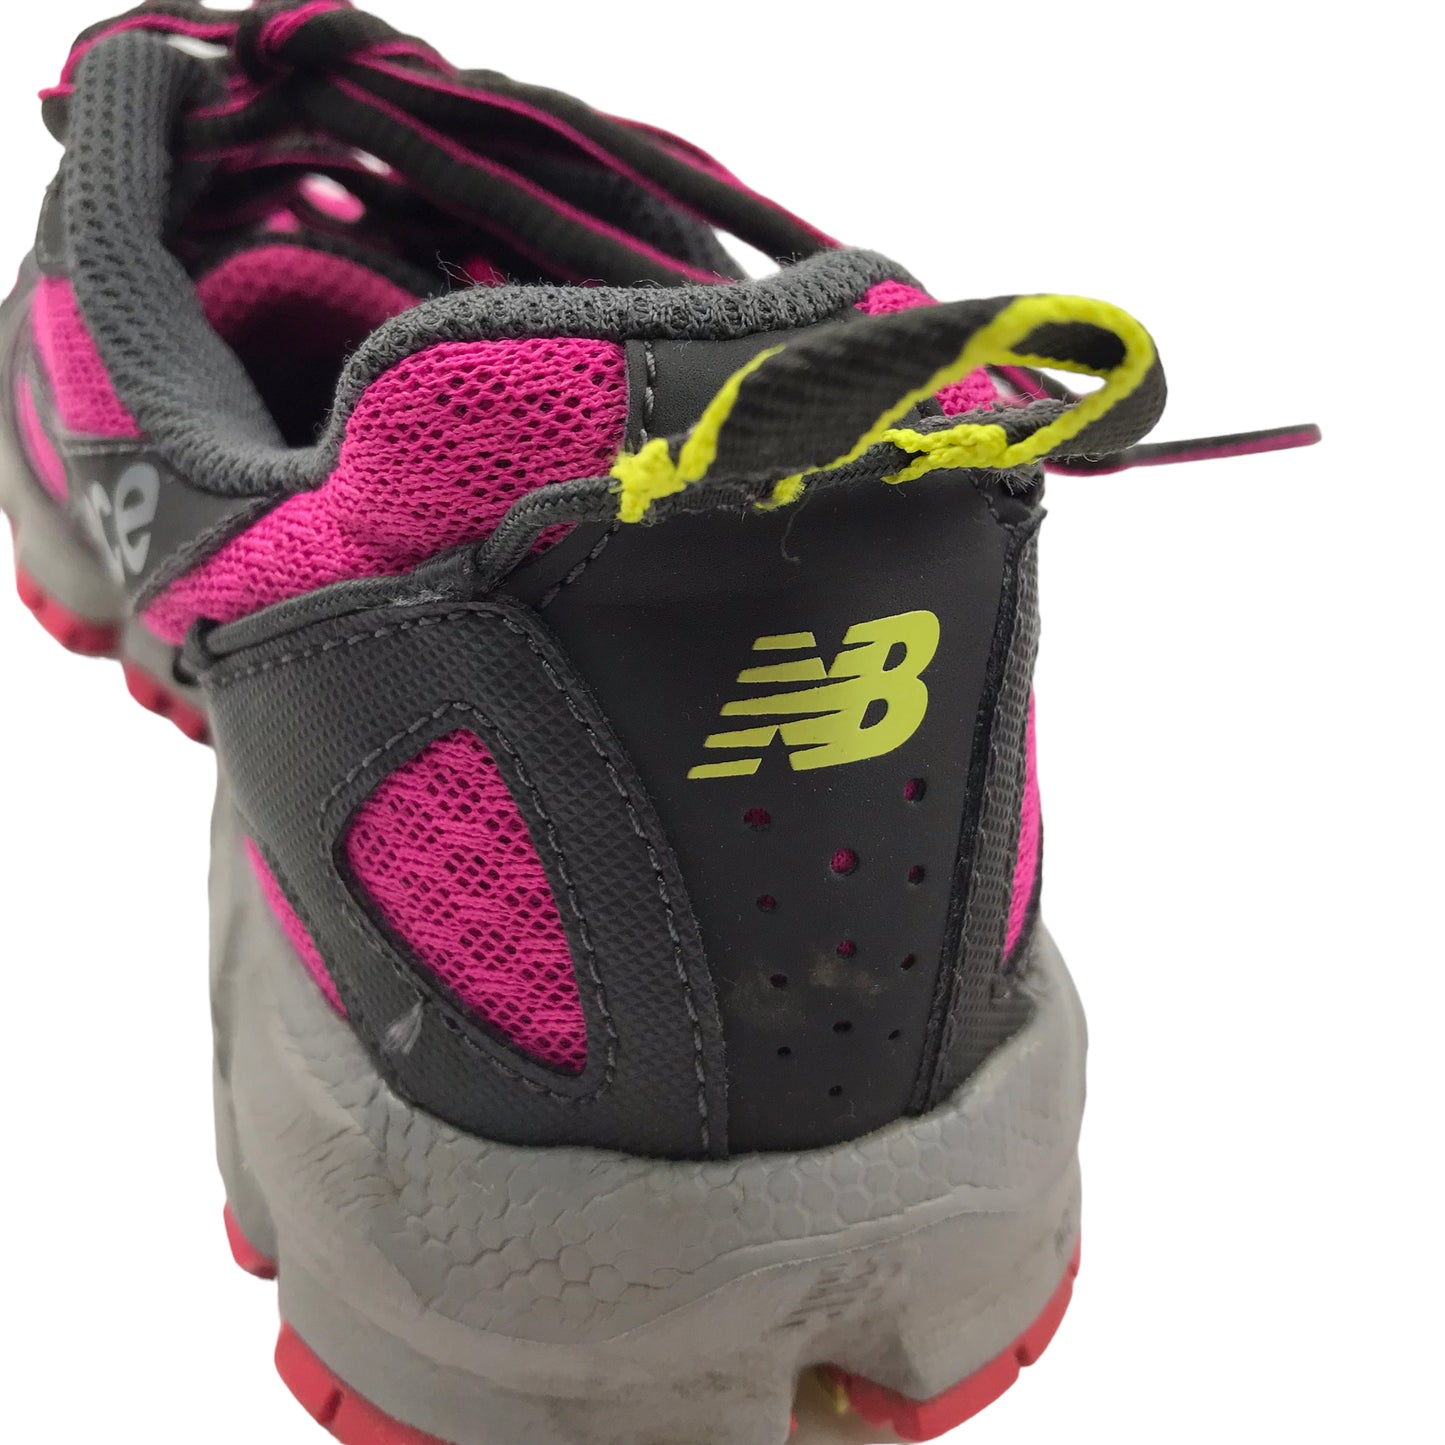 New Balance 610 V2 Pink Trainers Shoe Size 5